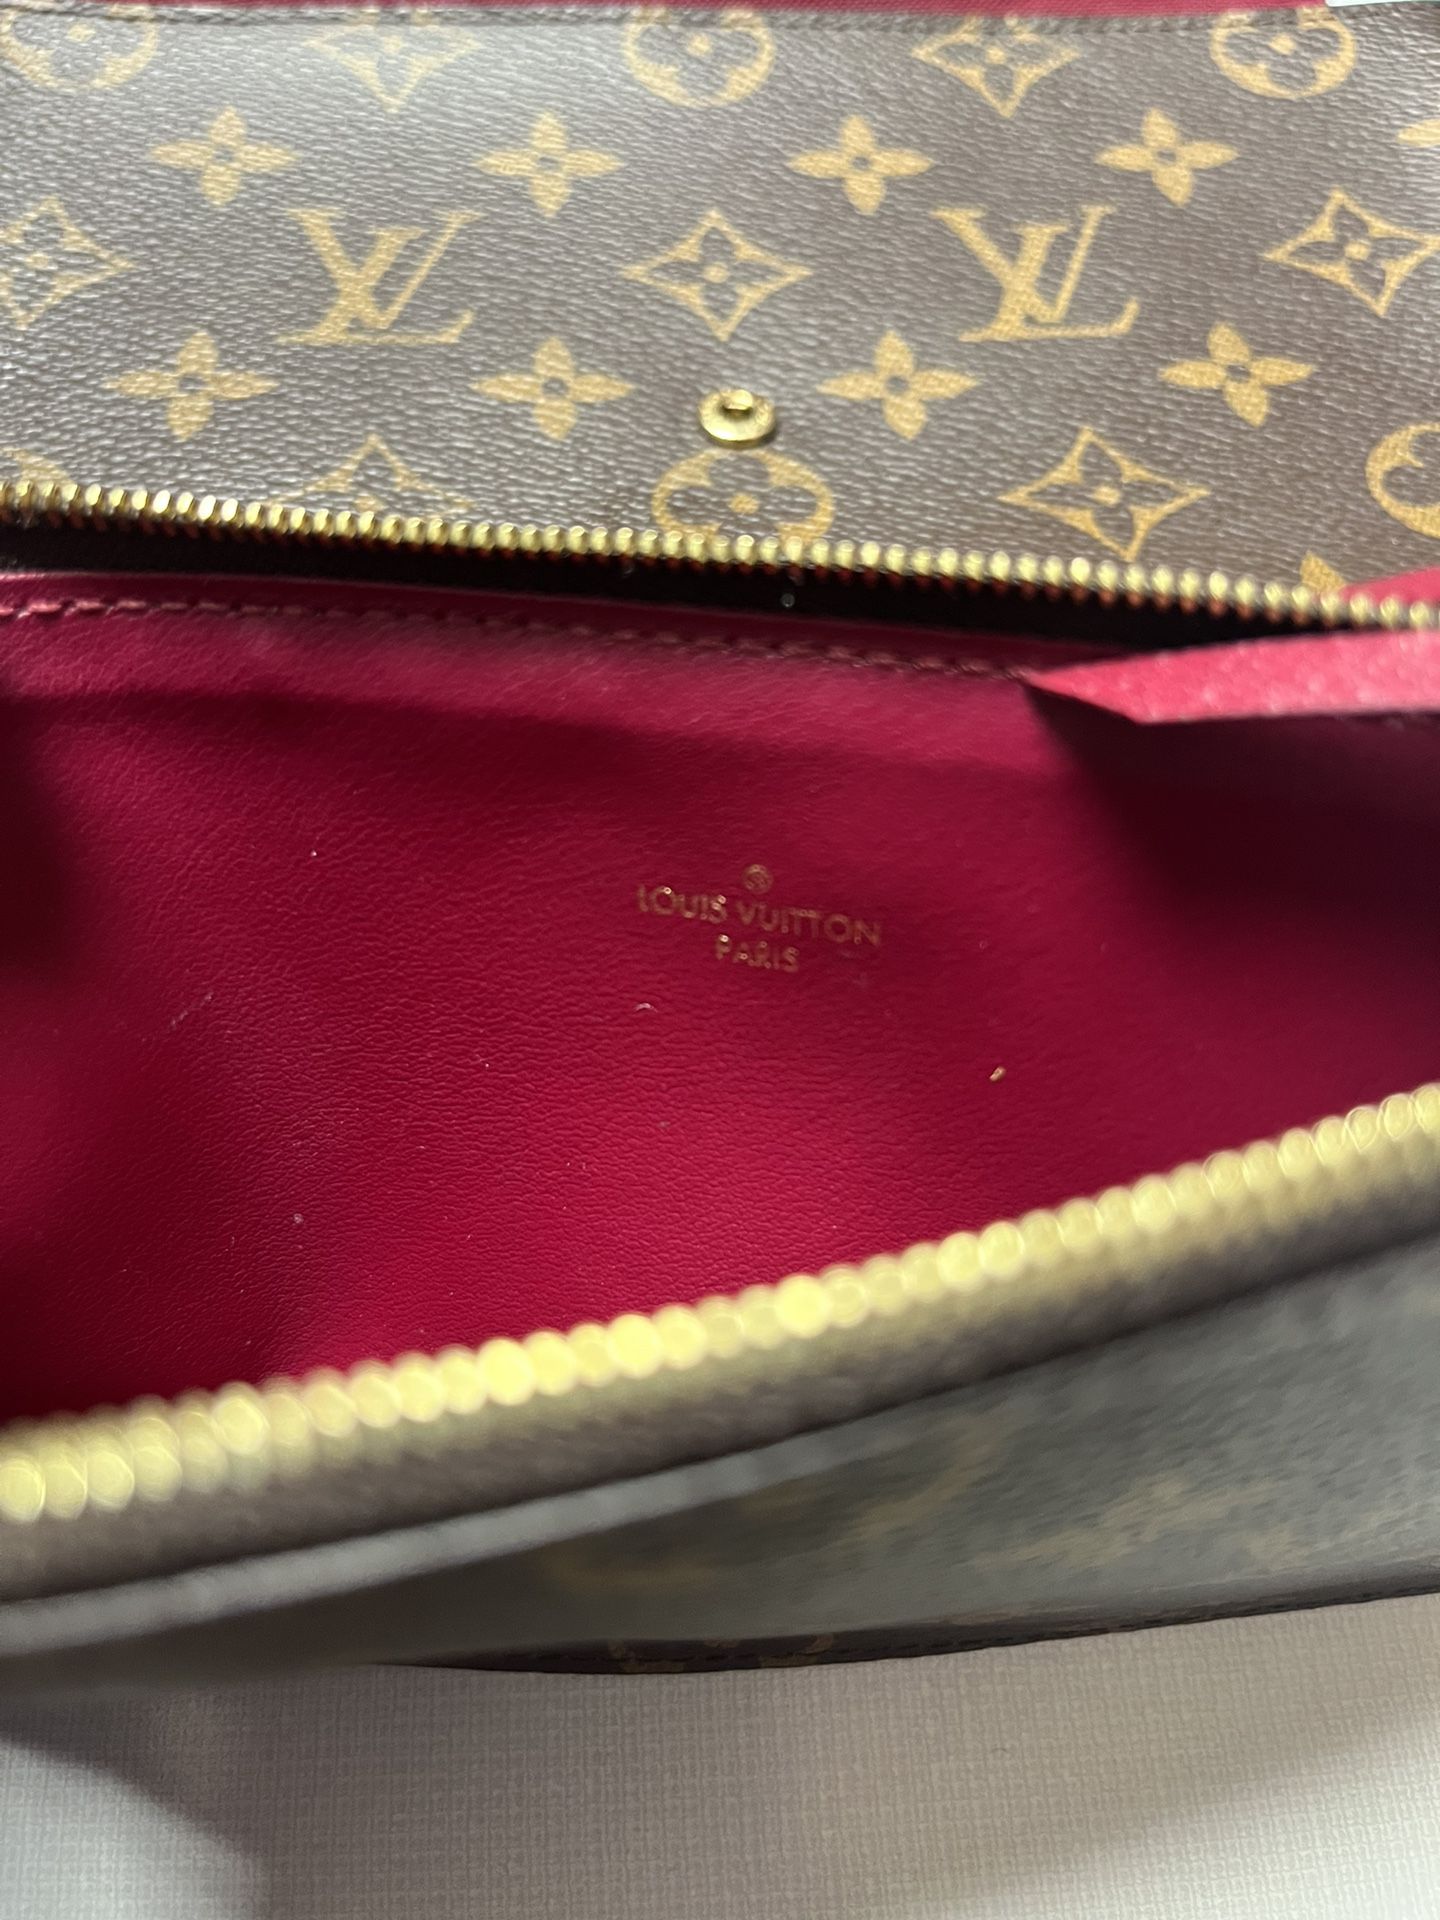 Louis Vuitton Pochette Felicie for Sale in Columbus, OH - OfferUp